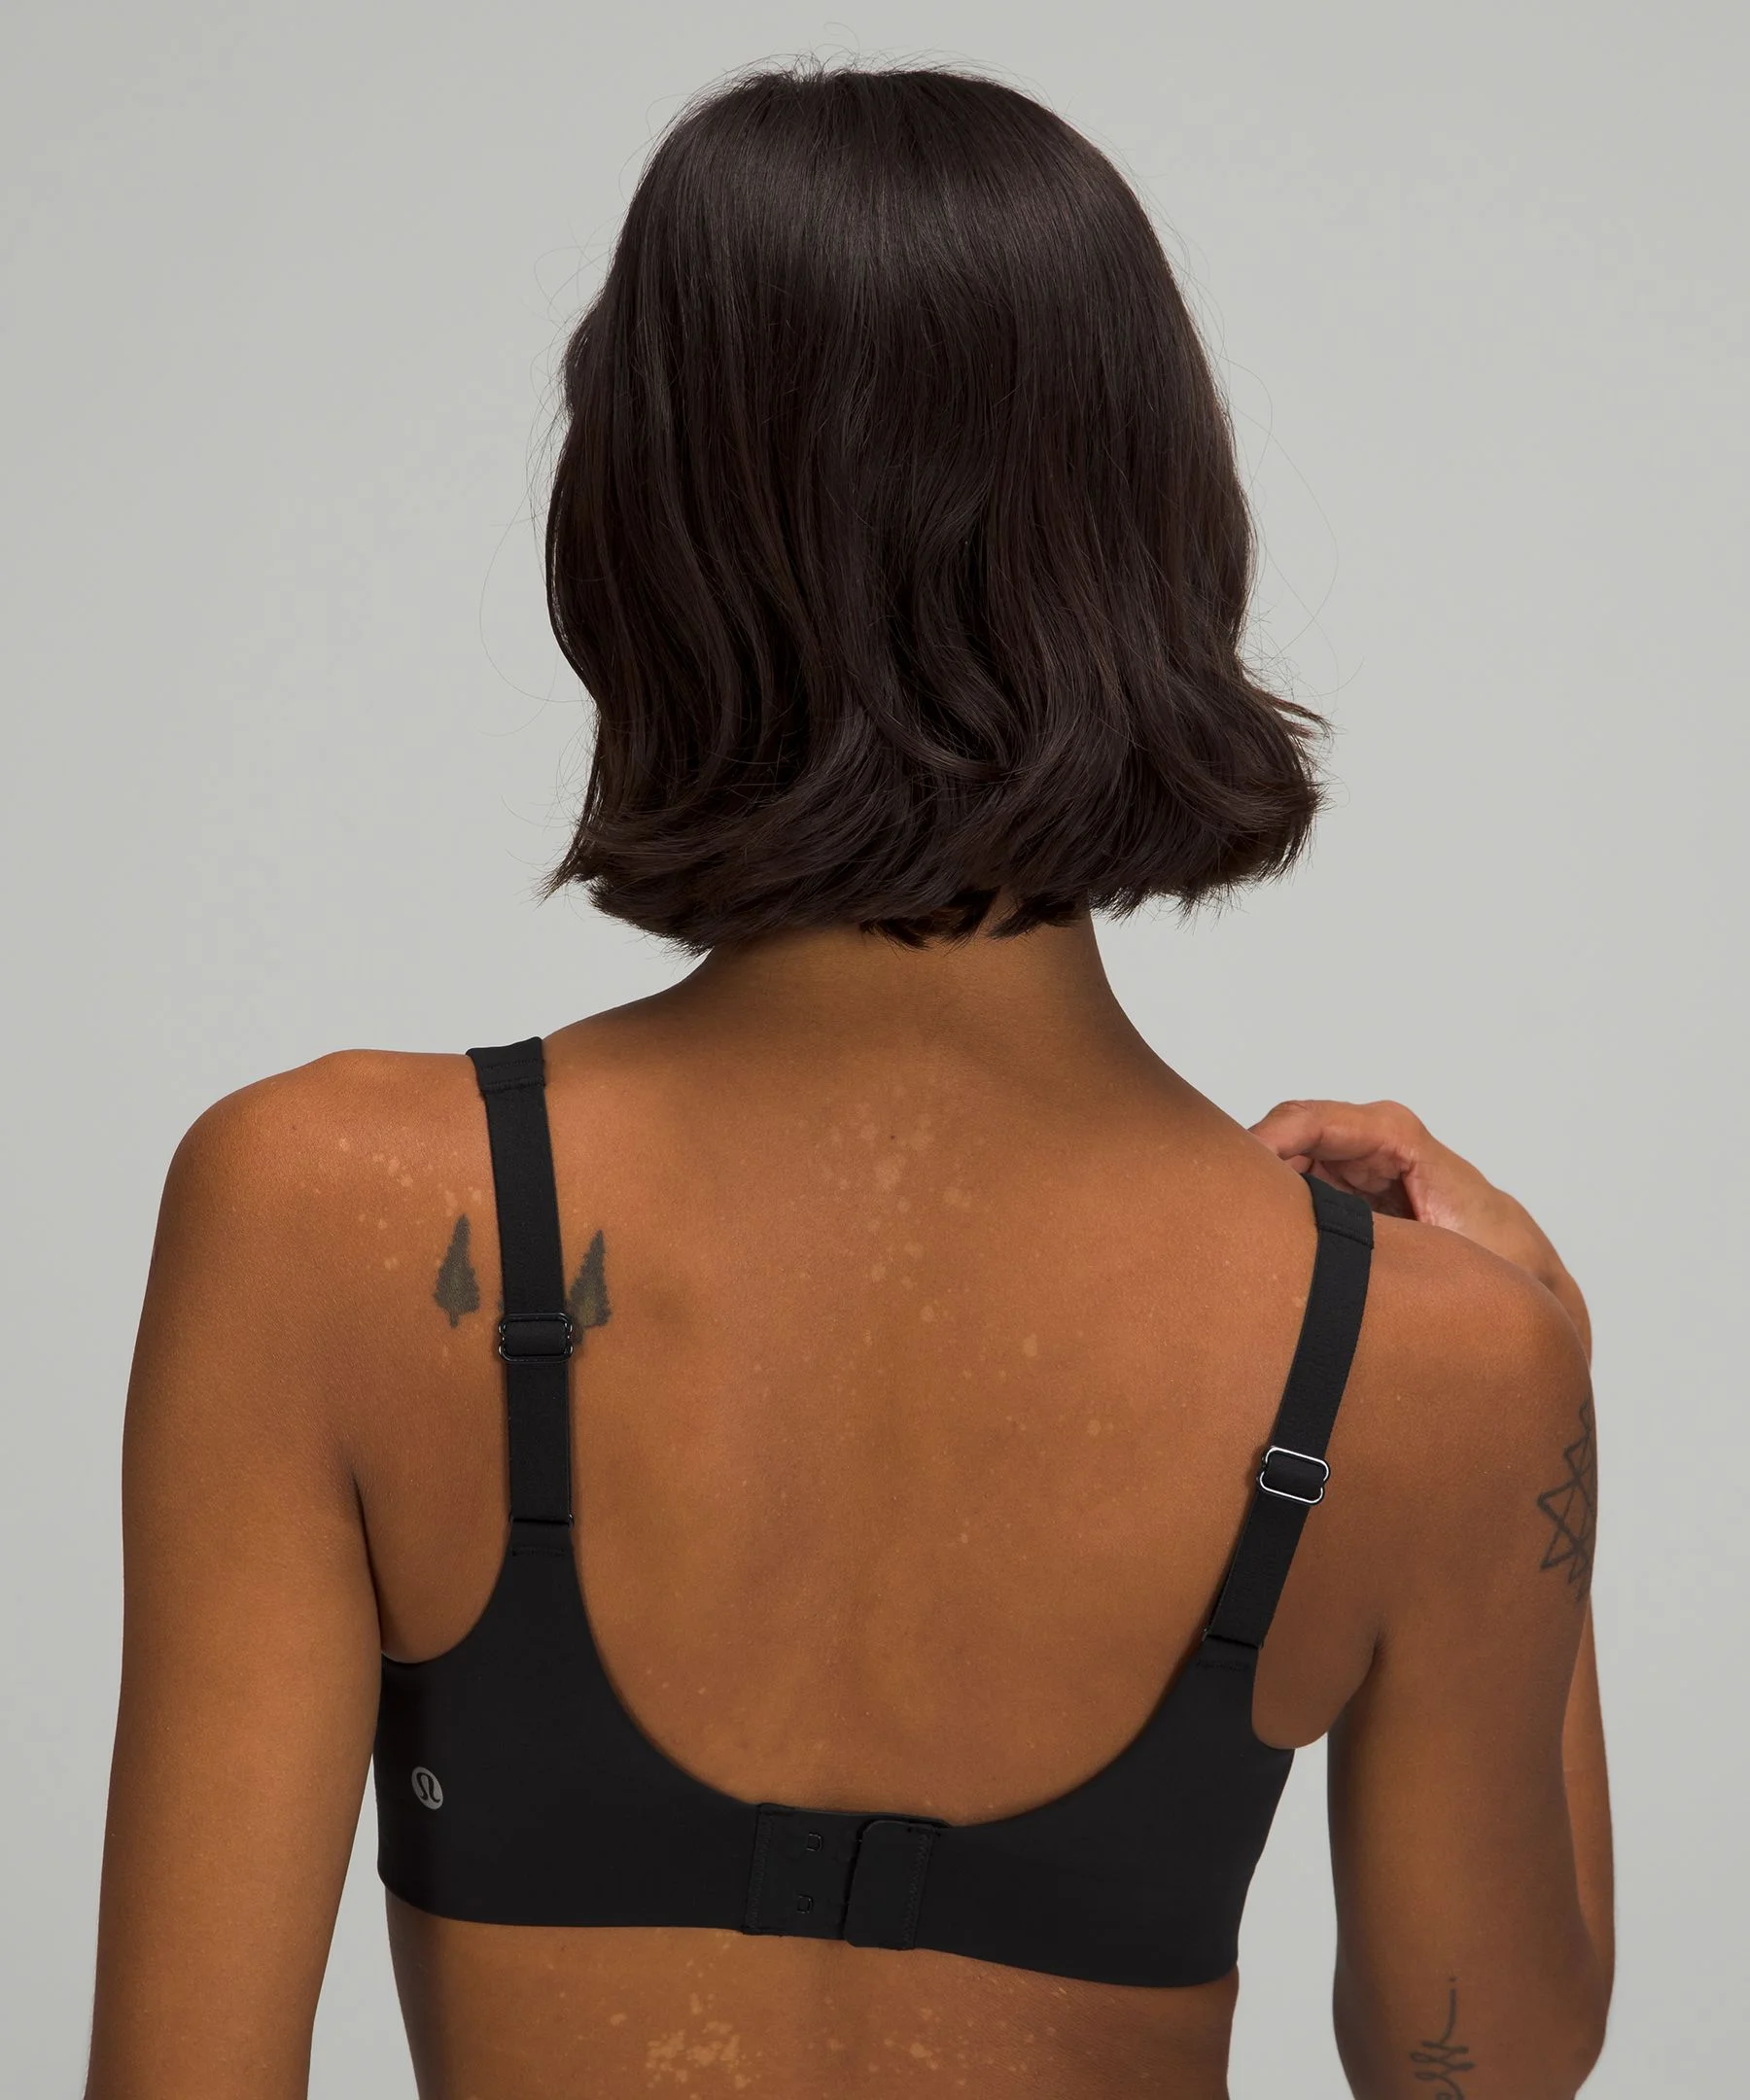 Lululemon In Alignment Straight-strap Bra *light Support, A/b Cups Online  Only In Double Dimension Starlight Black